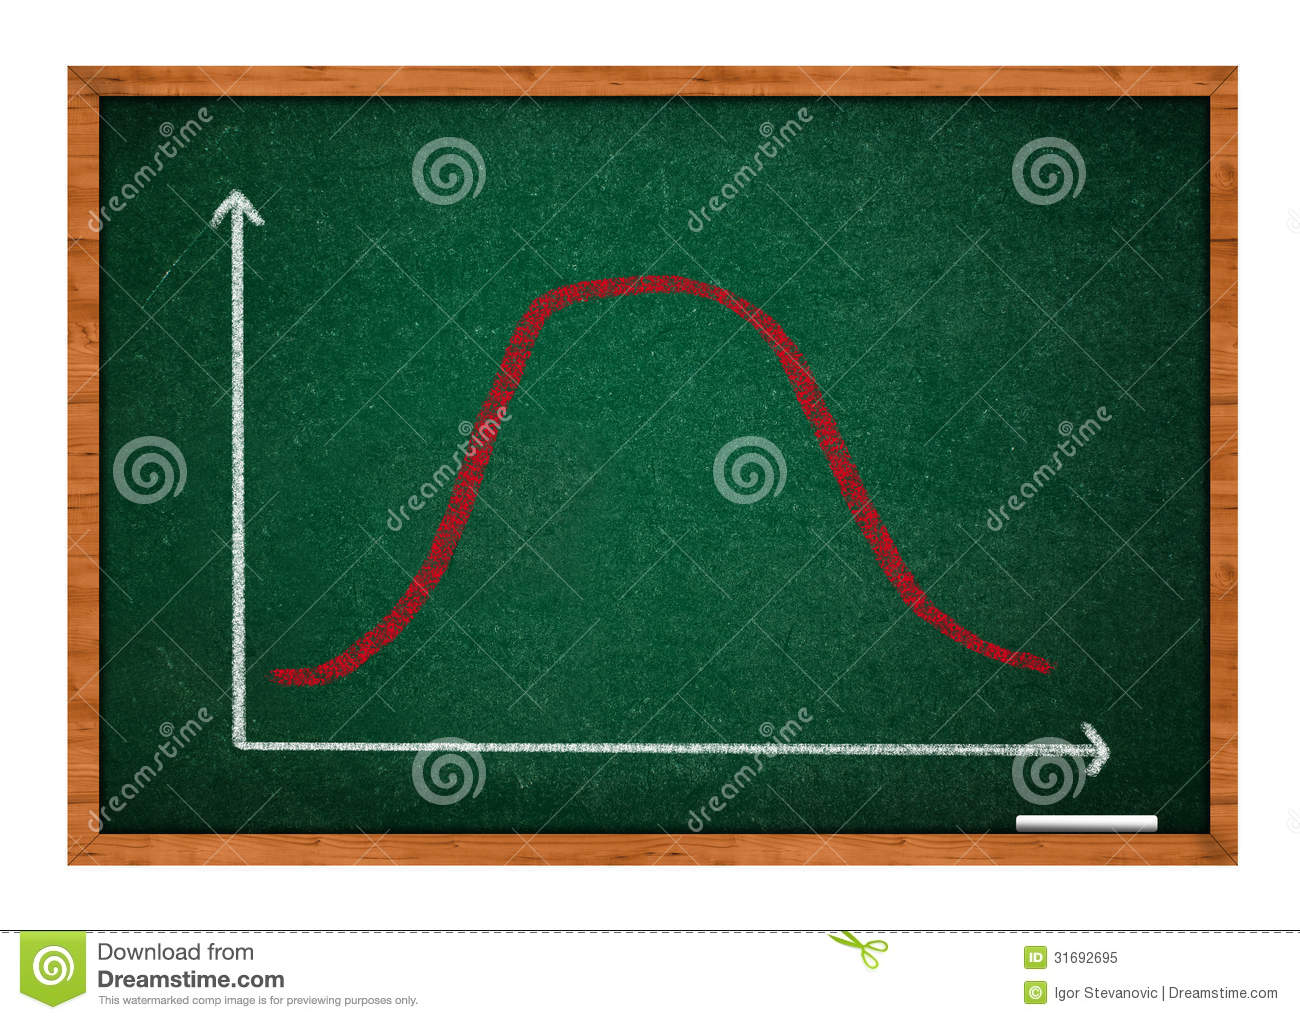 Gaussian Bell Or Normal Distribution Curve Royalty Free Stock Photo